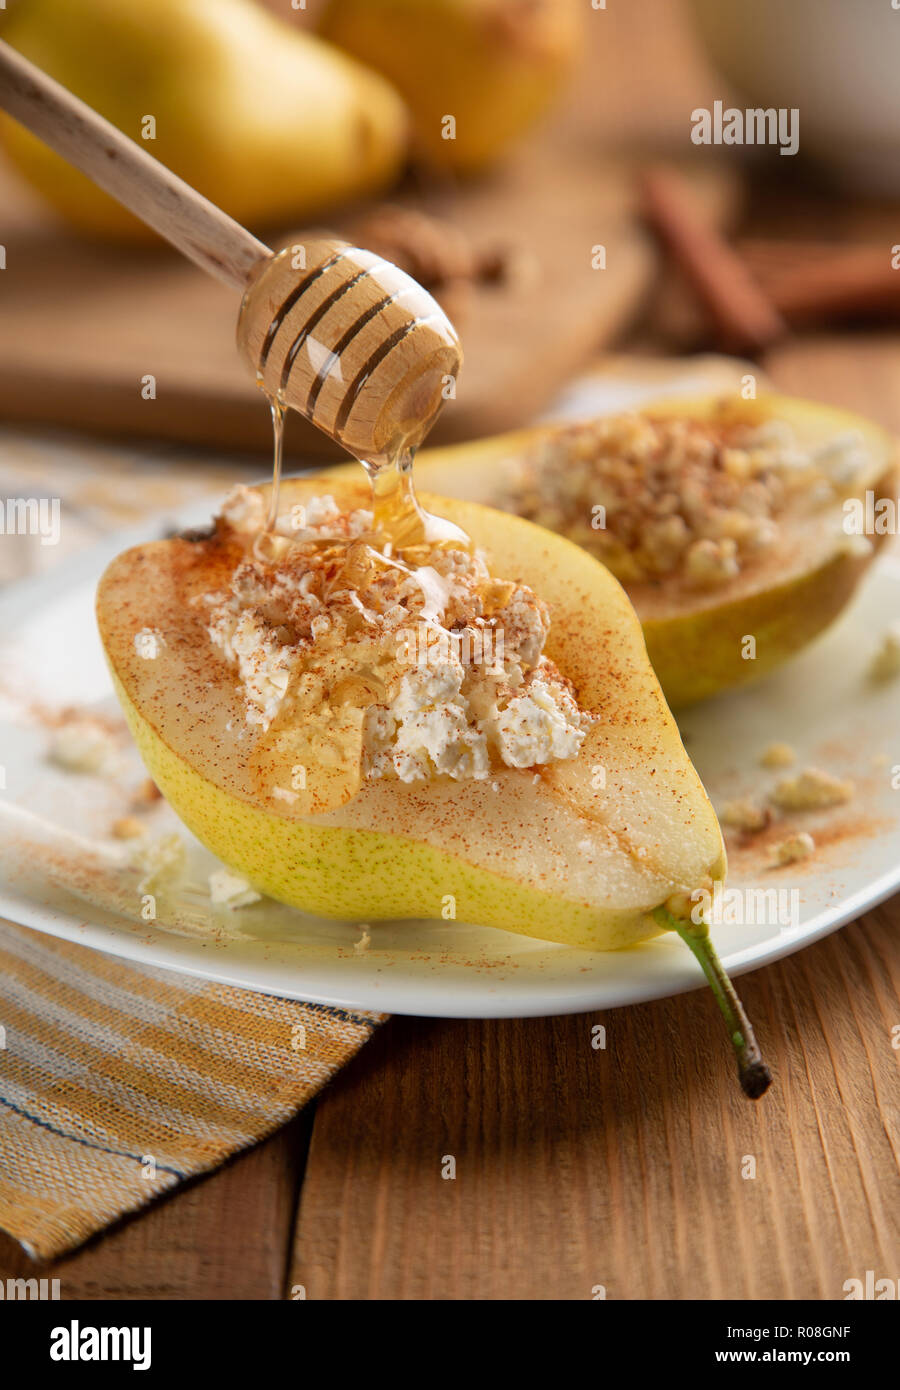 Half pear with cottage cheese, nuts, honey and cinnamon on white dish. It is watered with honey. Wooden table, background blurred. Concept - Healthy f Stock Photo